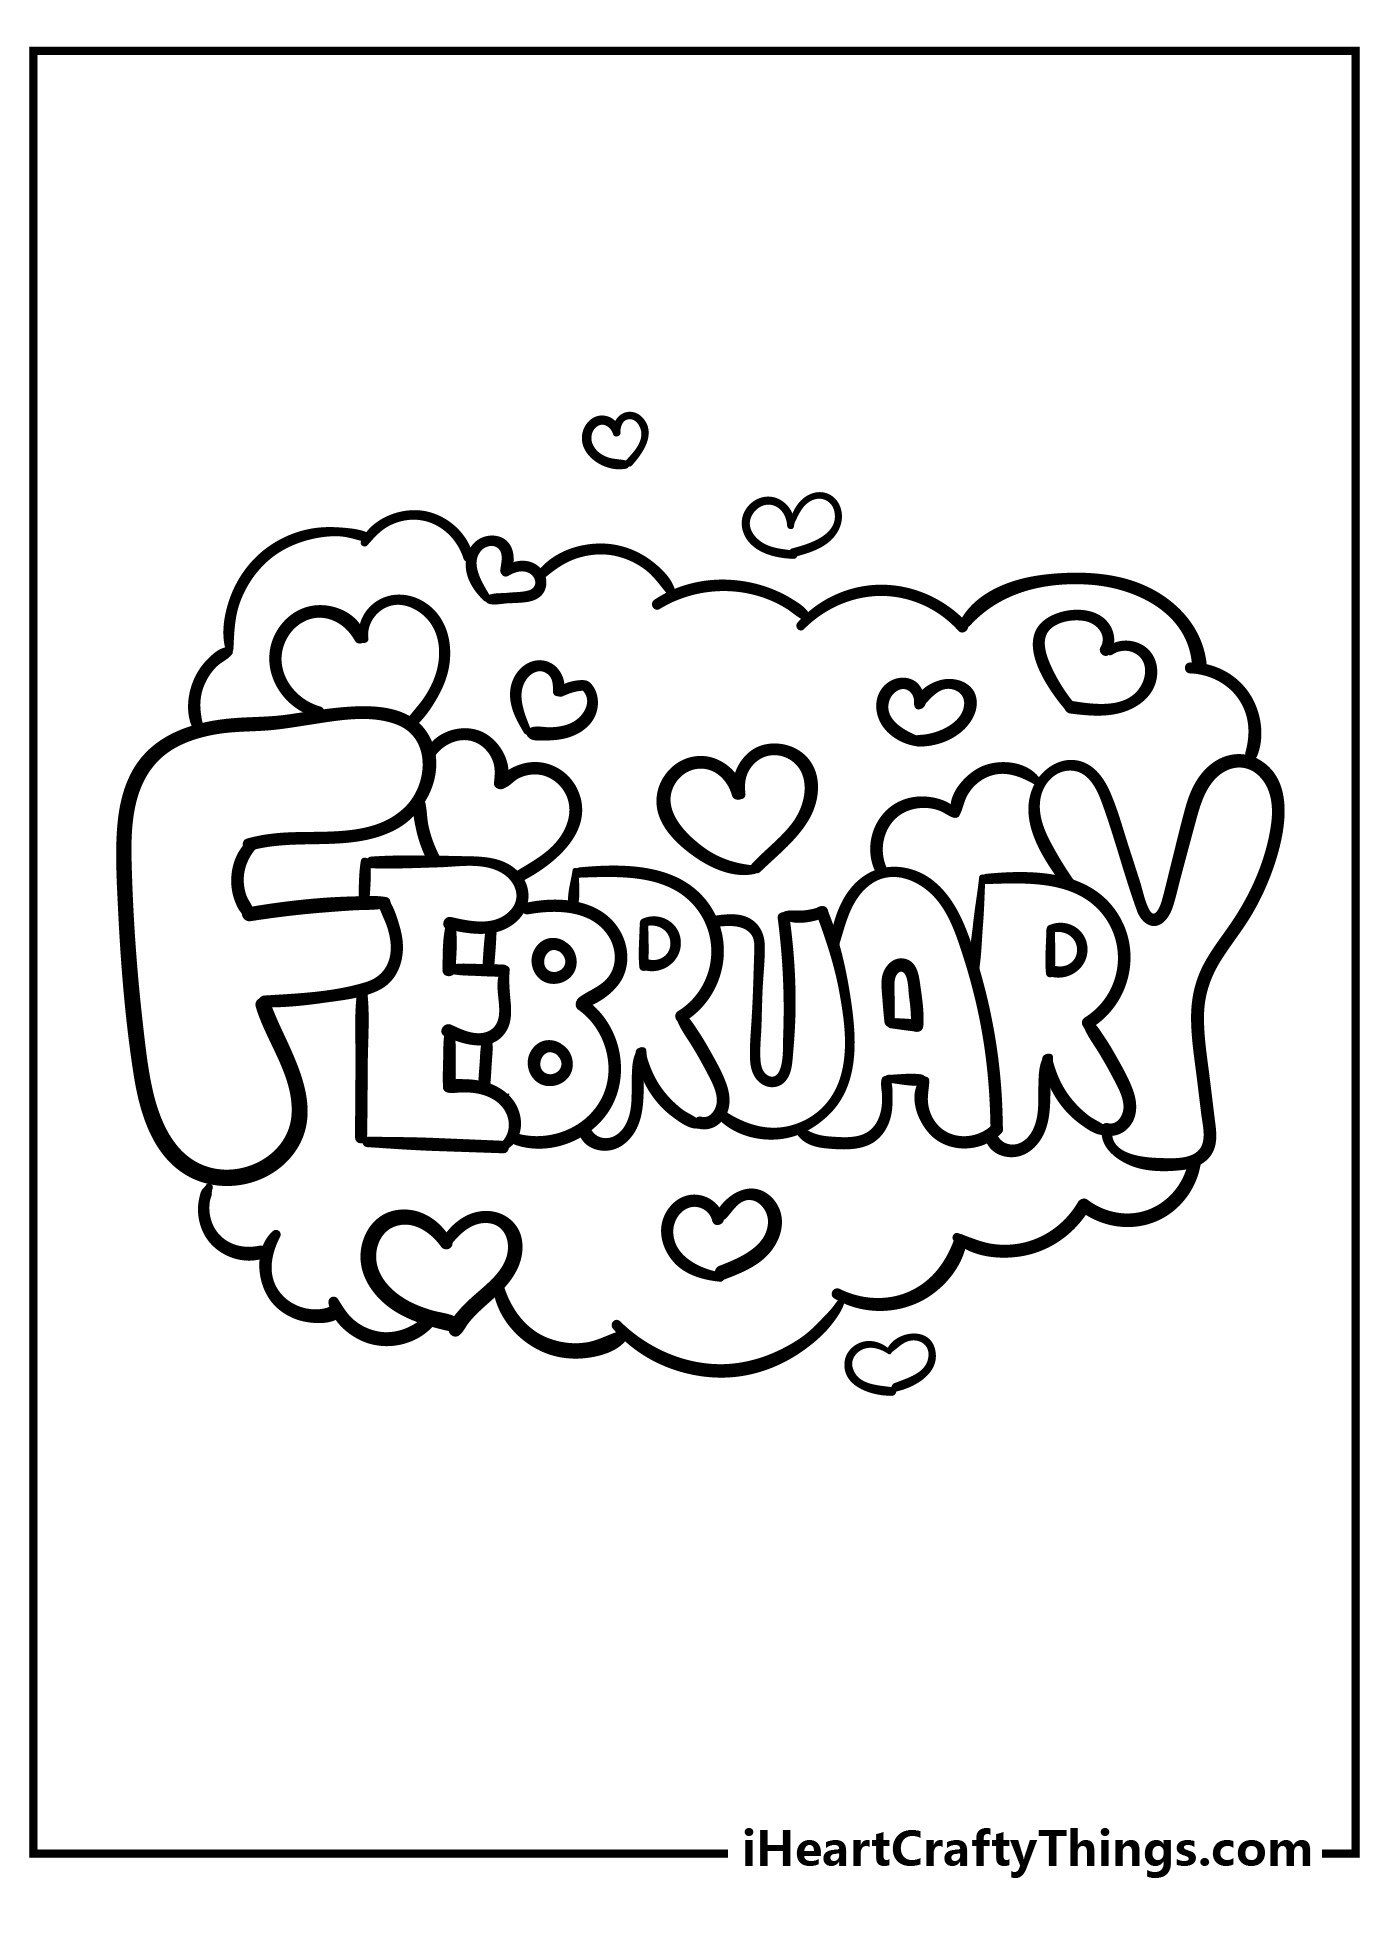 February coloring pages free printables